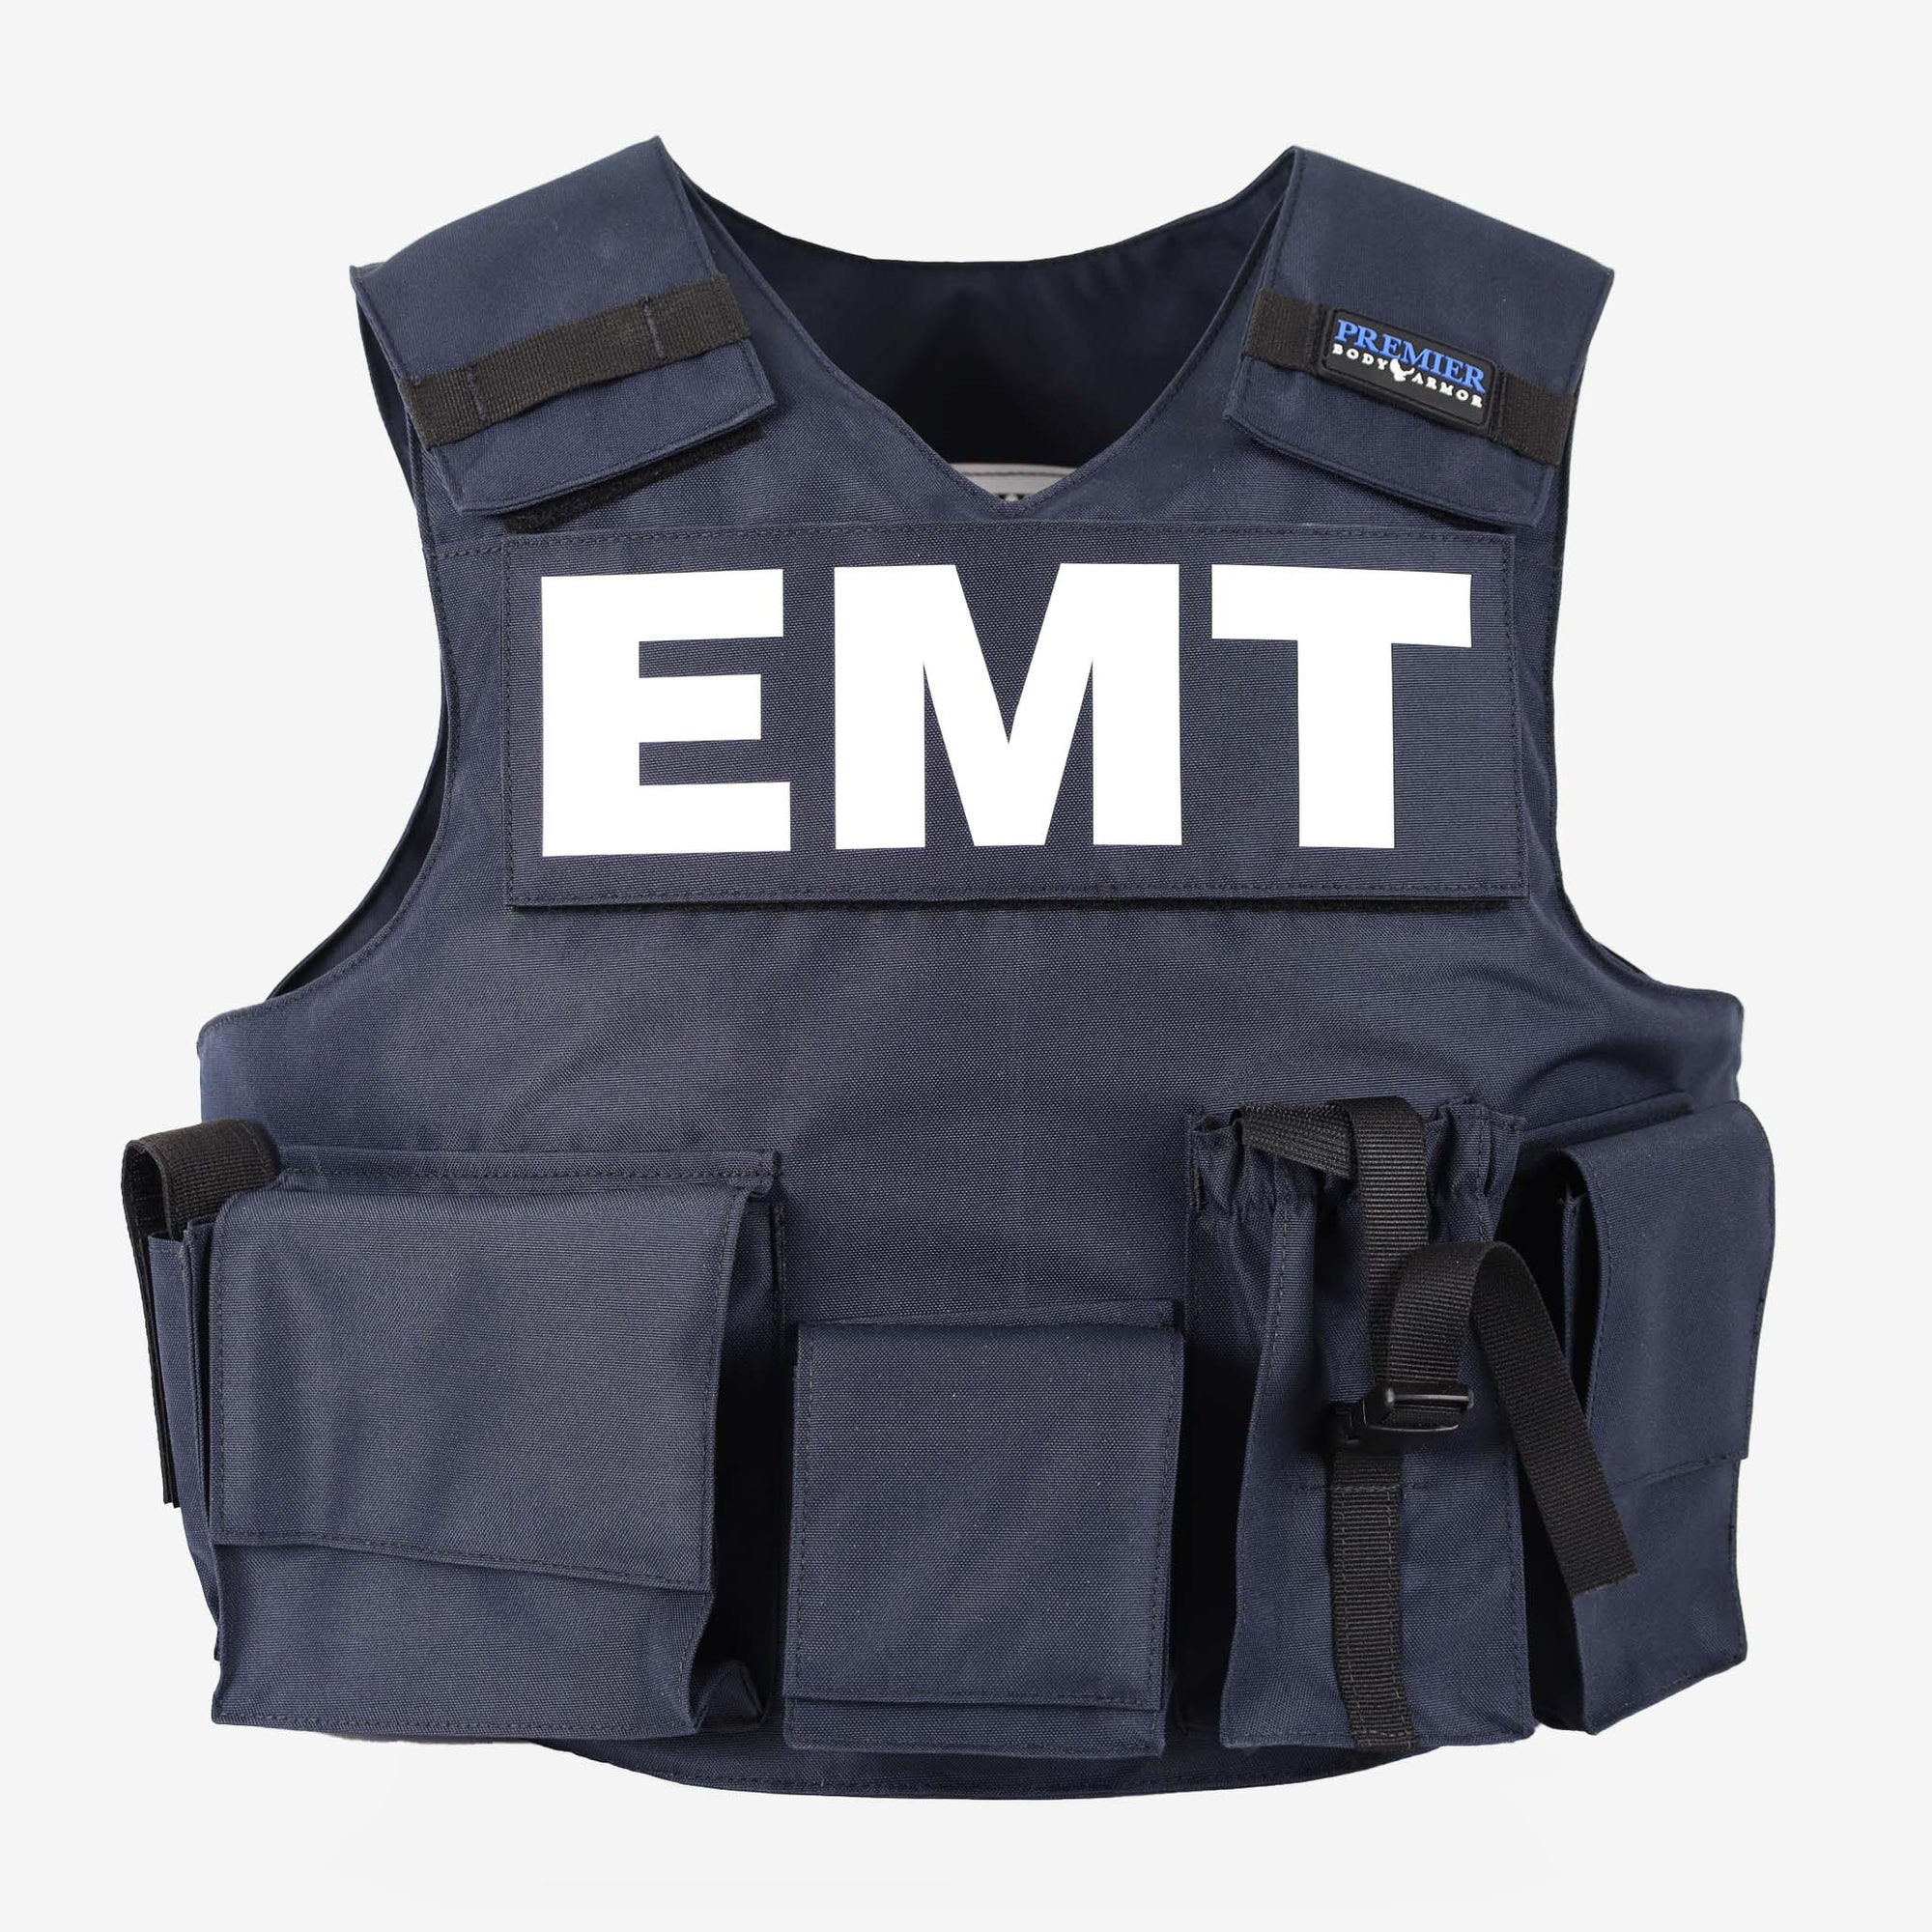 Our First Responder Vest available in black. A bulletproof vest option for any occupation. Level 3a body armor that stops all handgun rounds. 